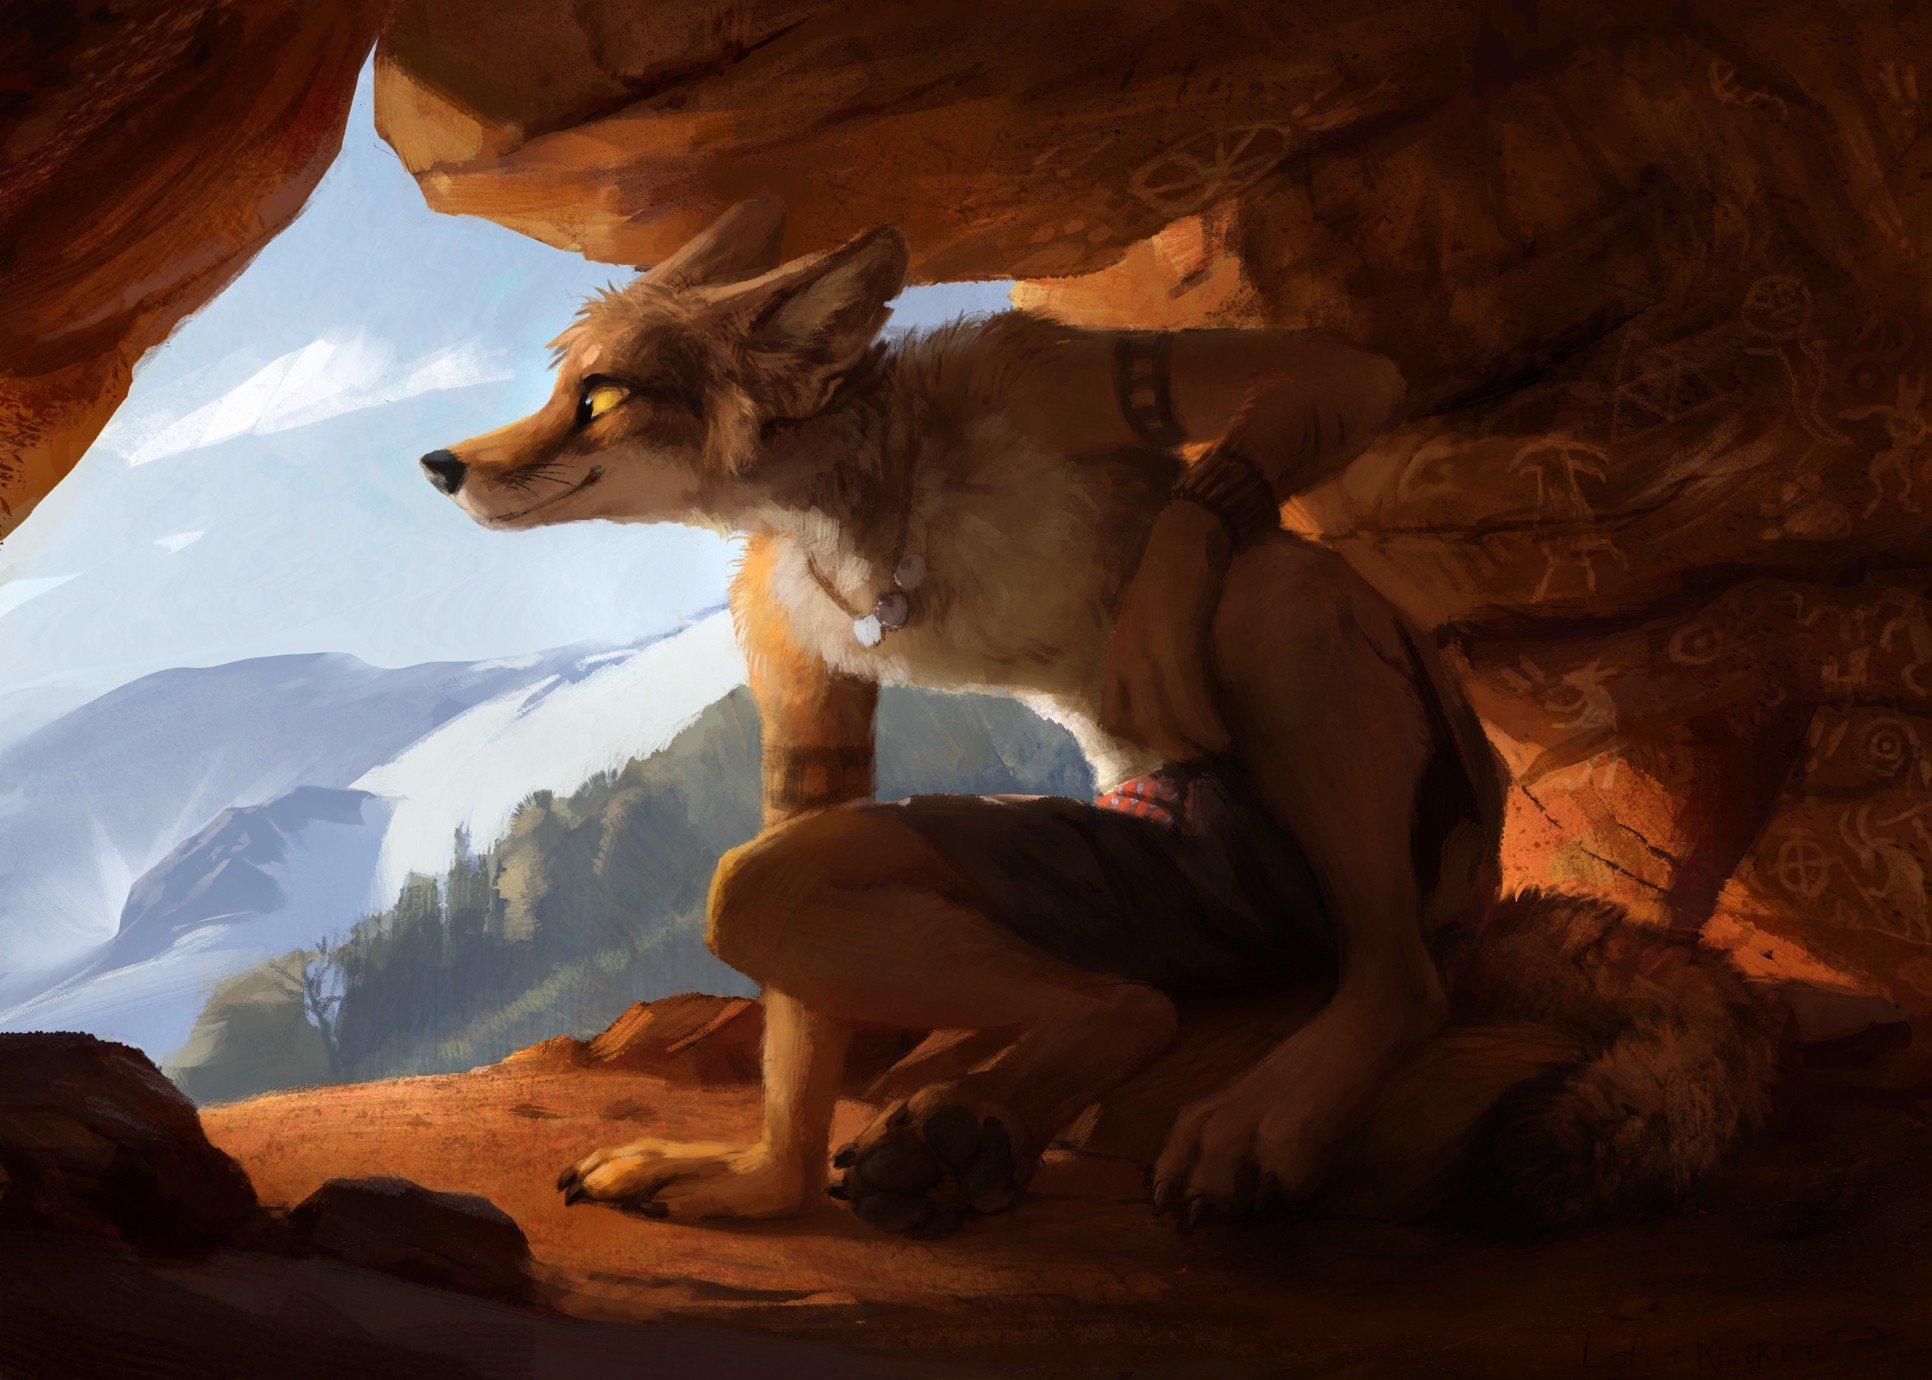 Anthro, Furry Wallpapers HD / Desktop and Mobile Backgrounds.